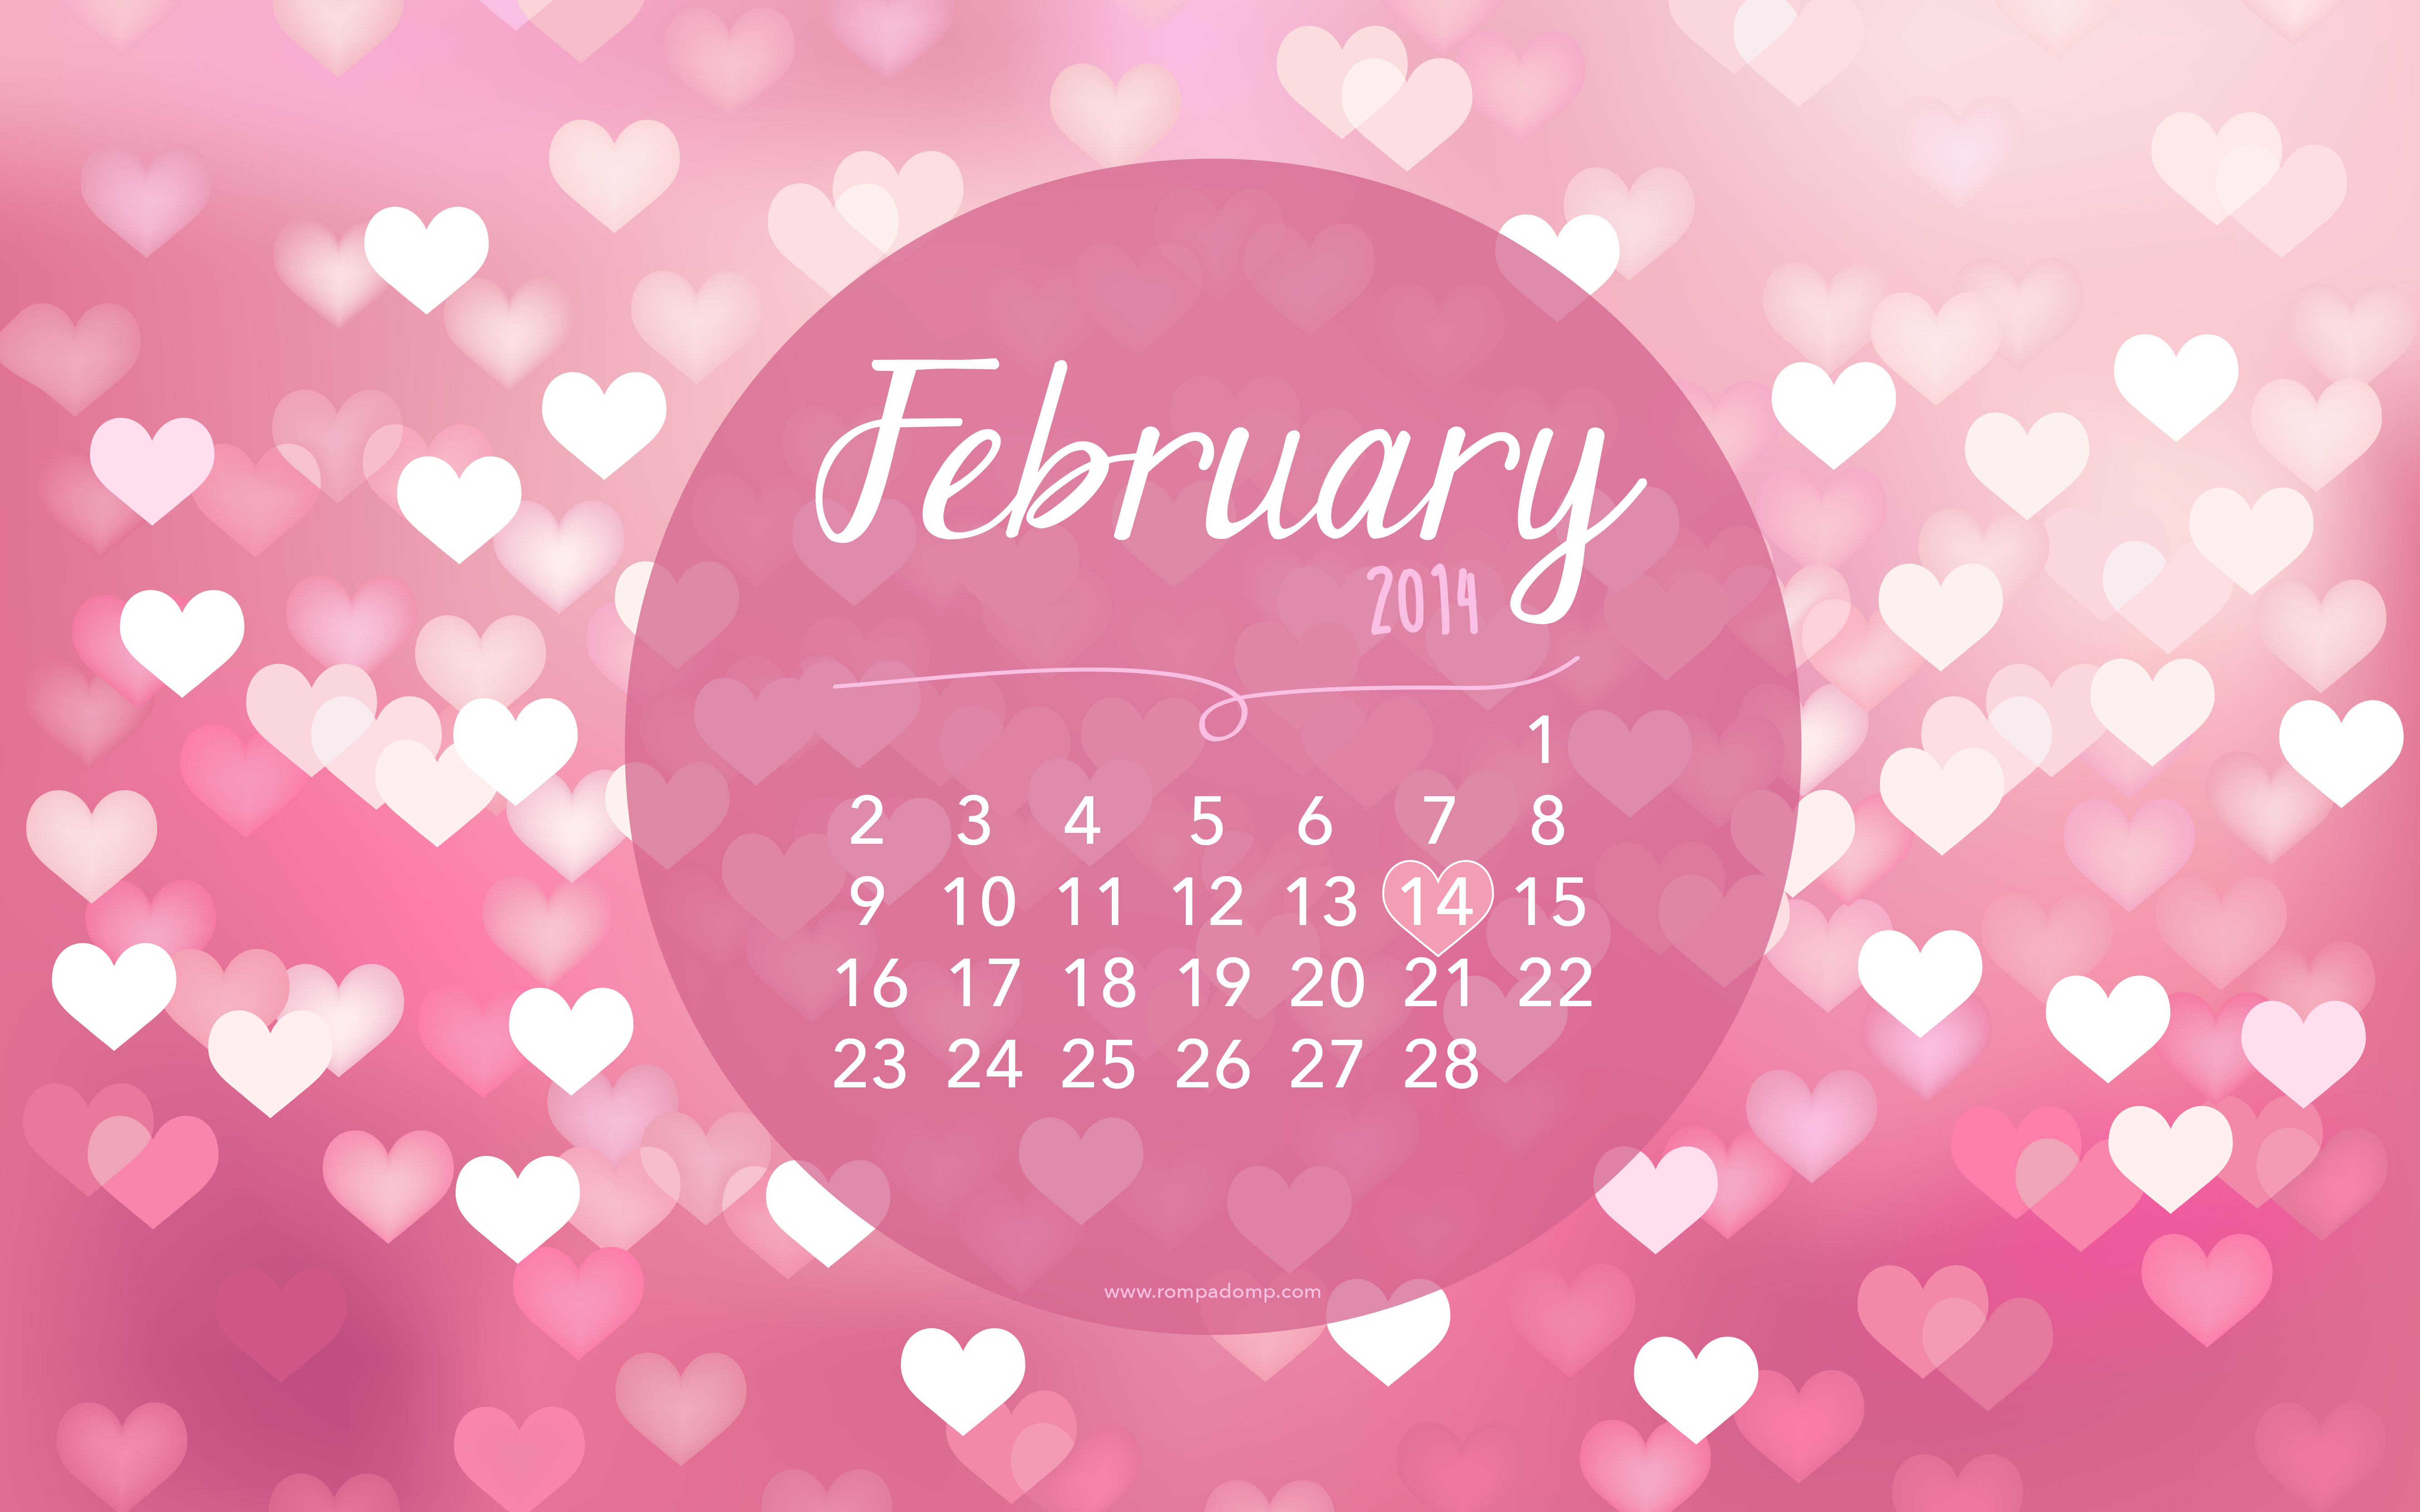 Free download February Wallpaper for Desktop on [5333x3333] for your